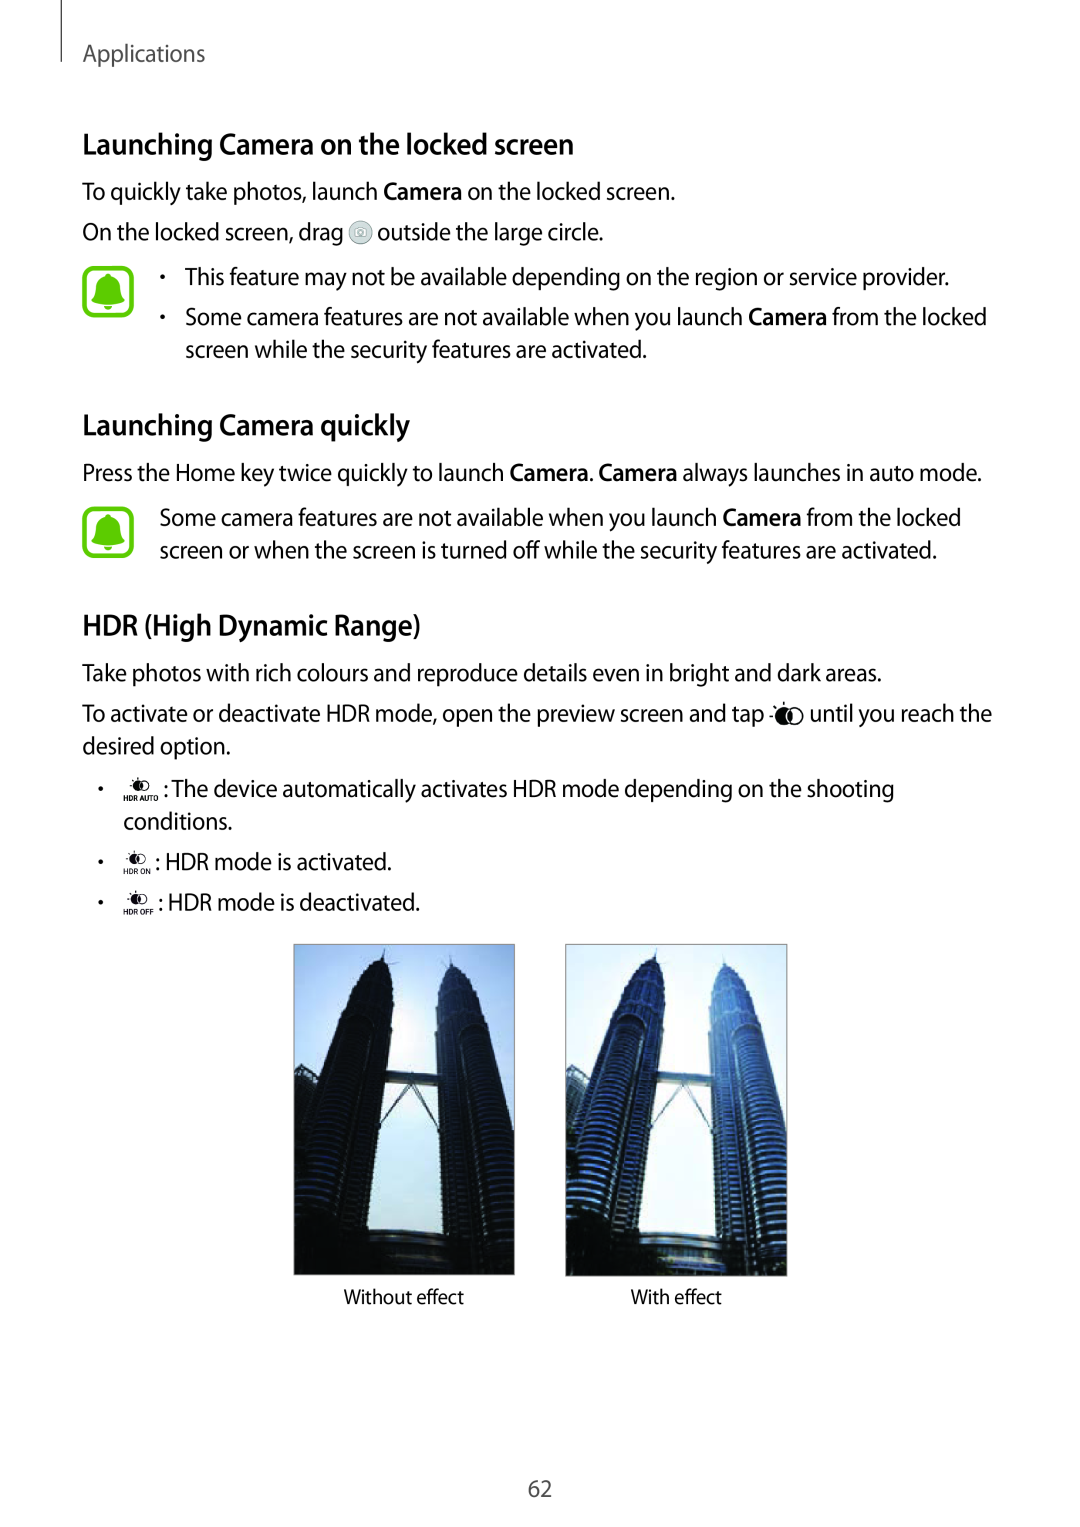 Samsung SM-G920FZWASER manual Launching Camera on the locked screen, Launching Camera quickly, HDR High Dynamic Range 